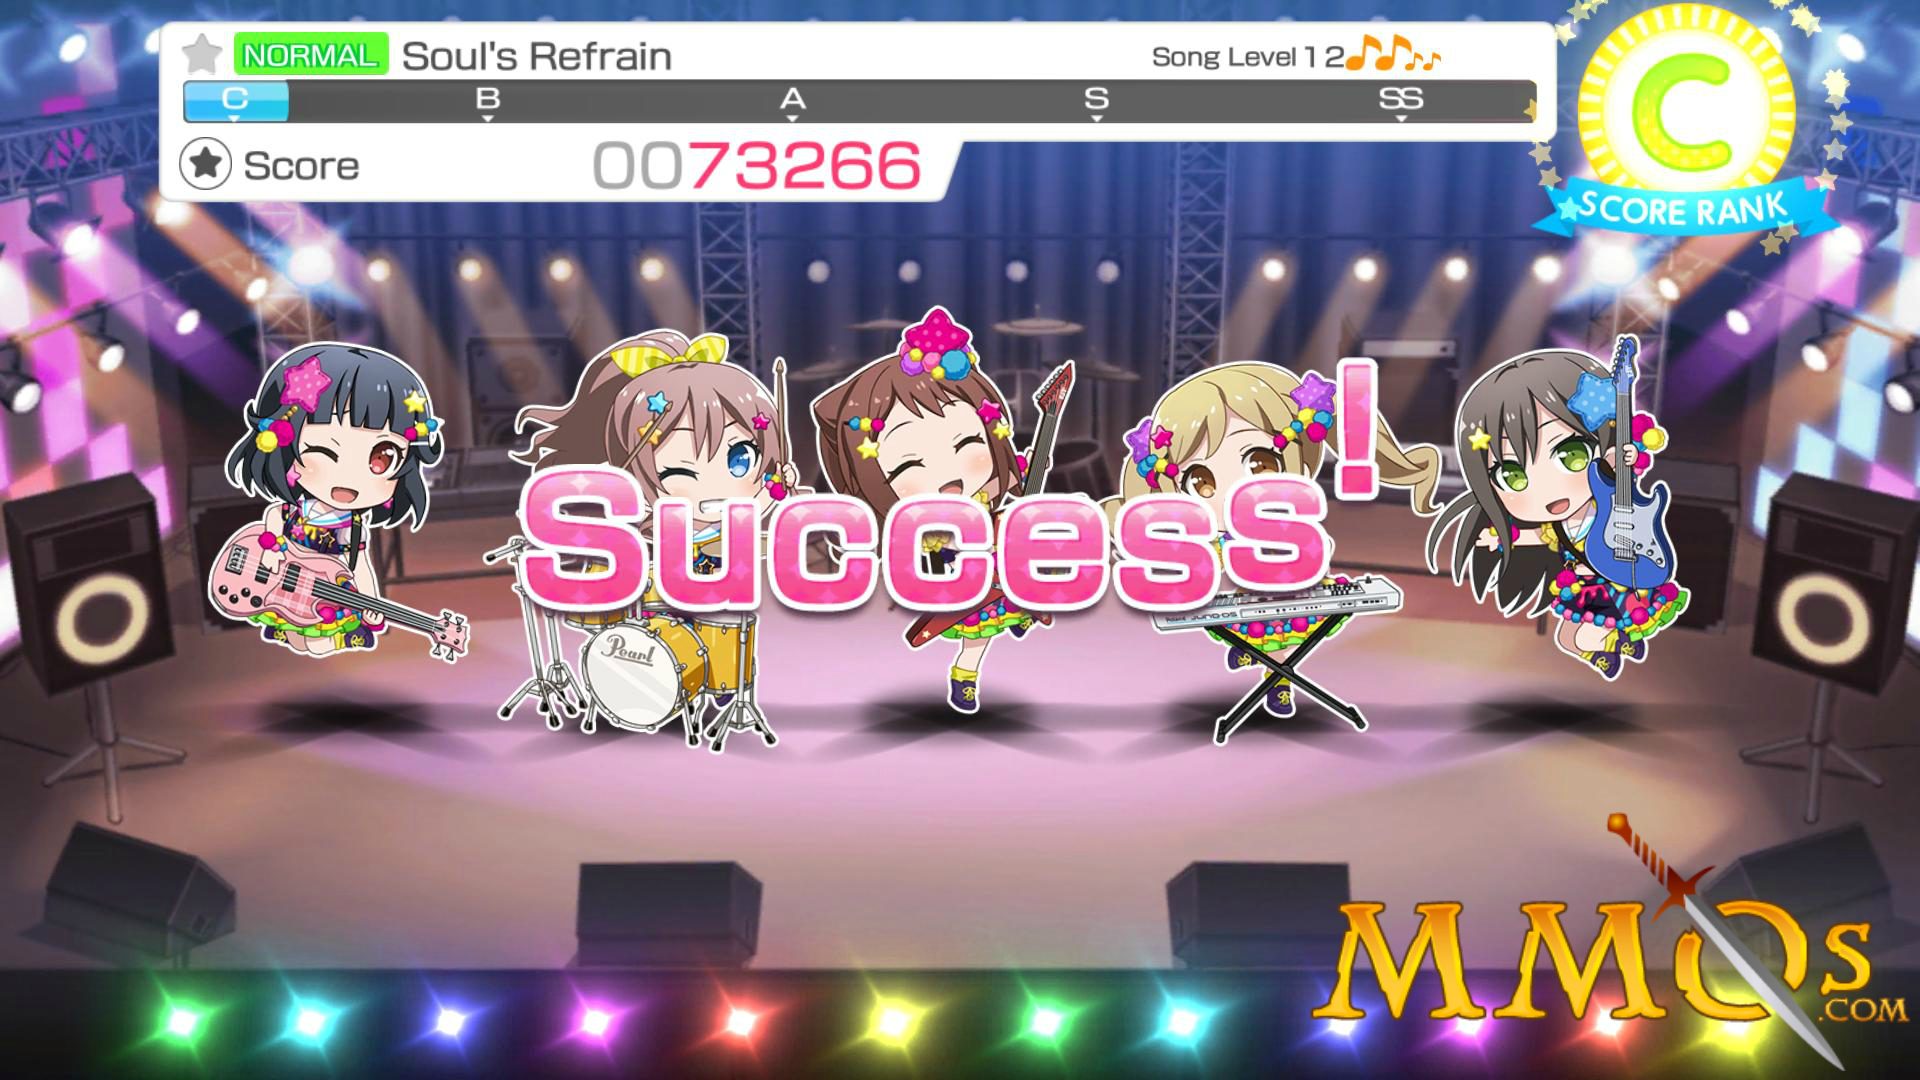 Bang Dream! Girls Band Party] Parking in Events Guide 